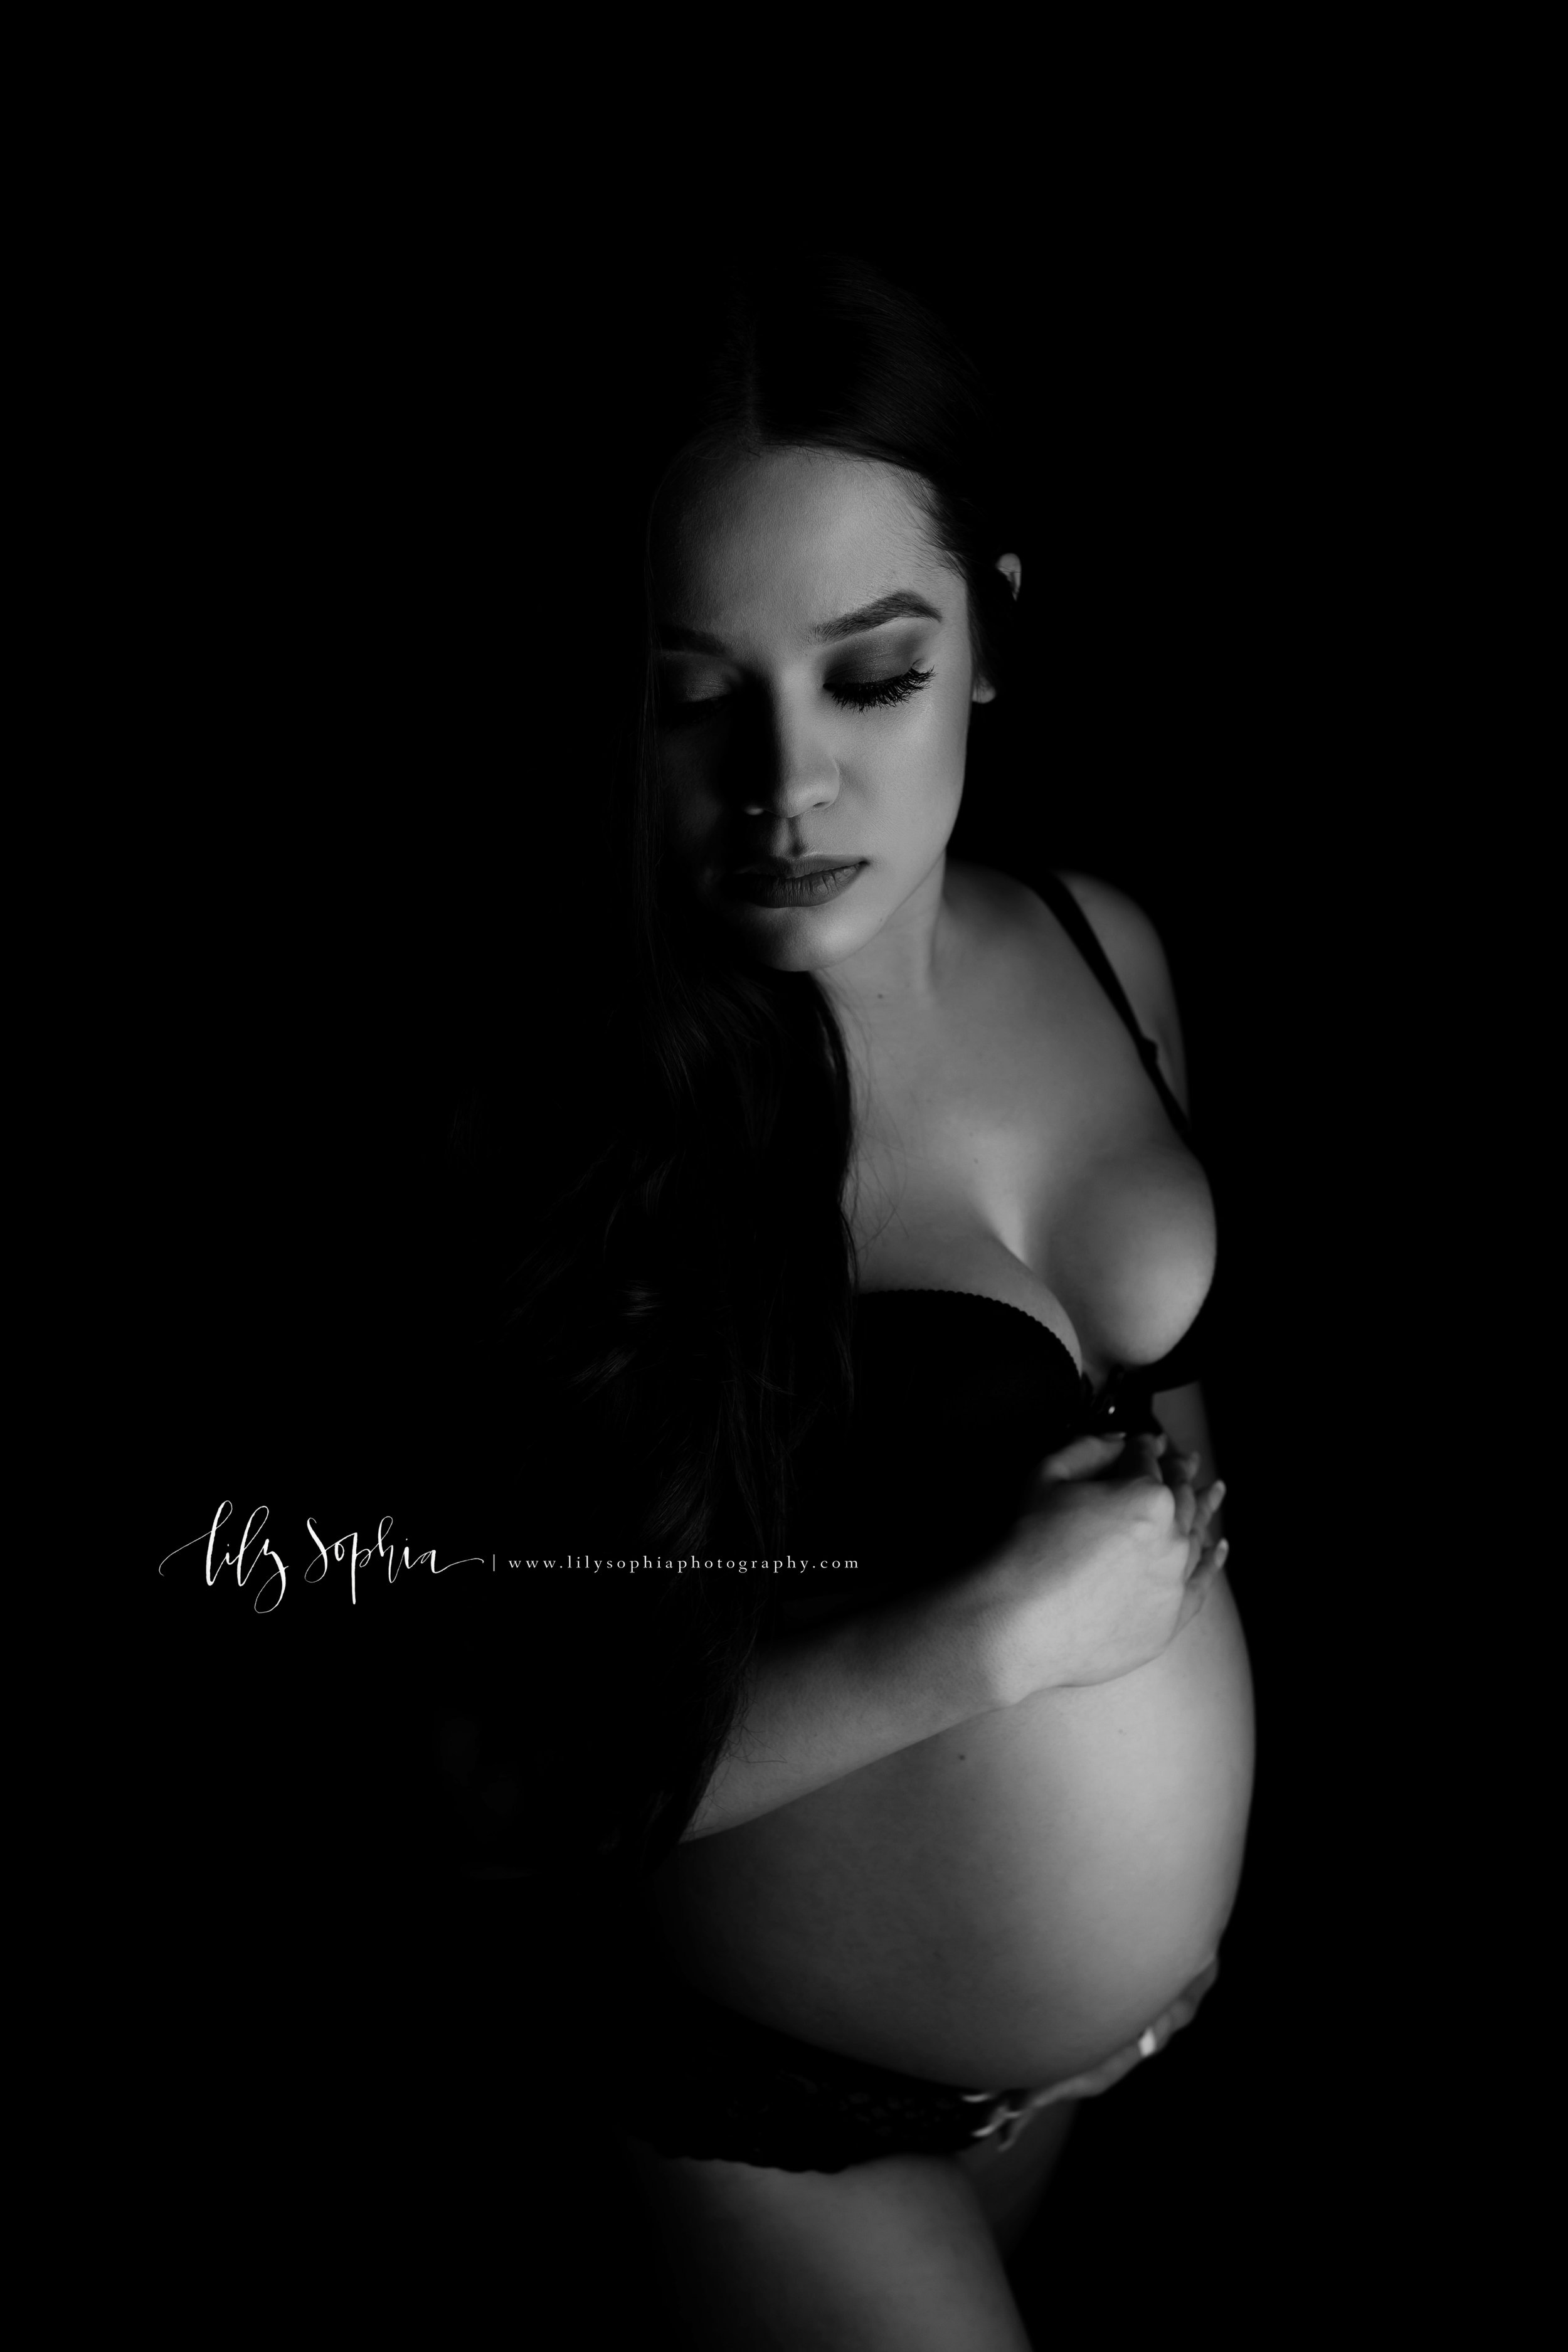  Black and white editorial maternity fine art image of beautiful pregnant Hispanic woman with long dark hair dressed in black lace bra and robe  with a black background in the Atlanta studio of Lily Sophia Photography.  